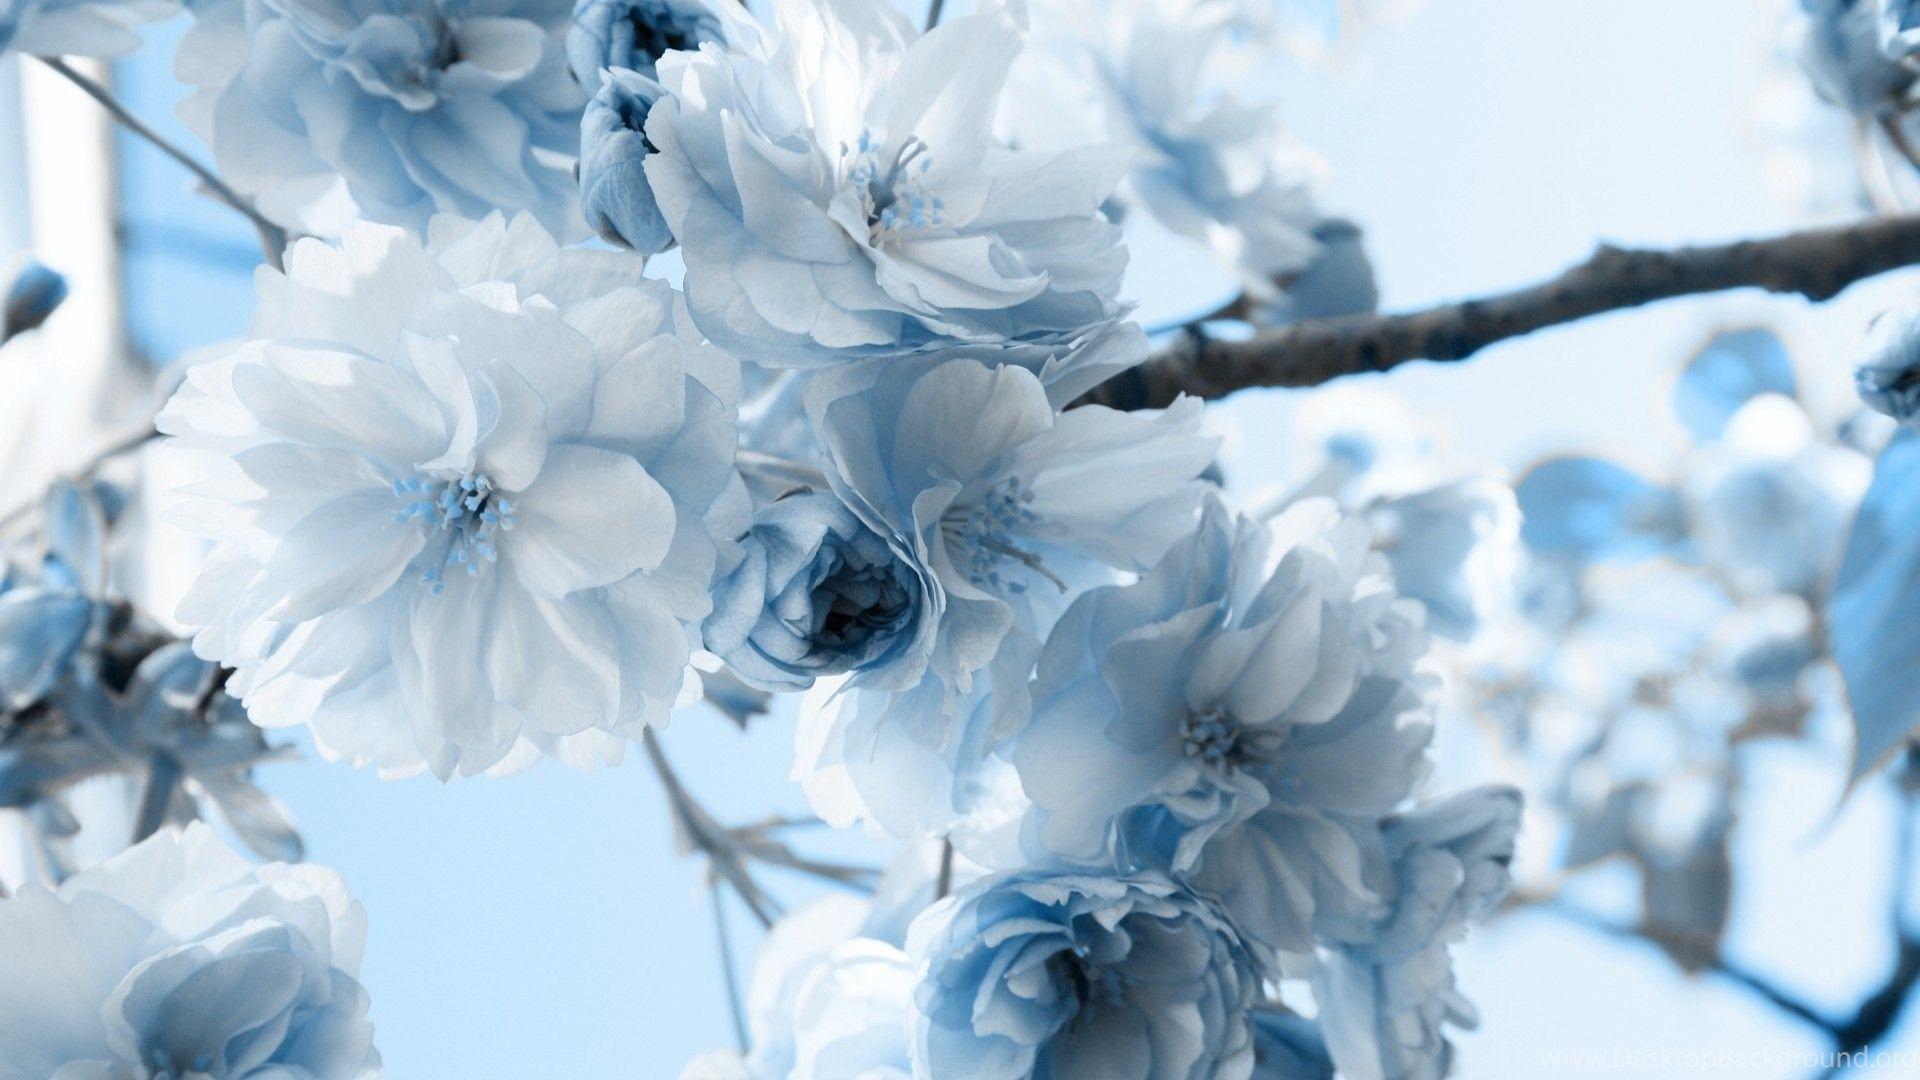 Blue and White Flower Wallpapers - Top Free Blue and White Flower